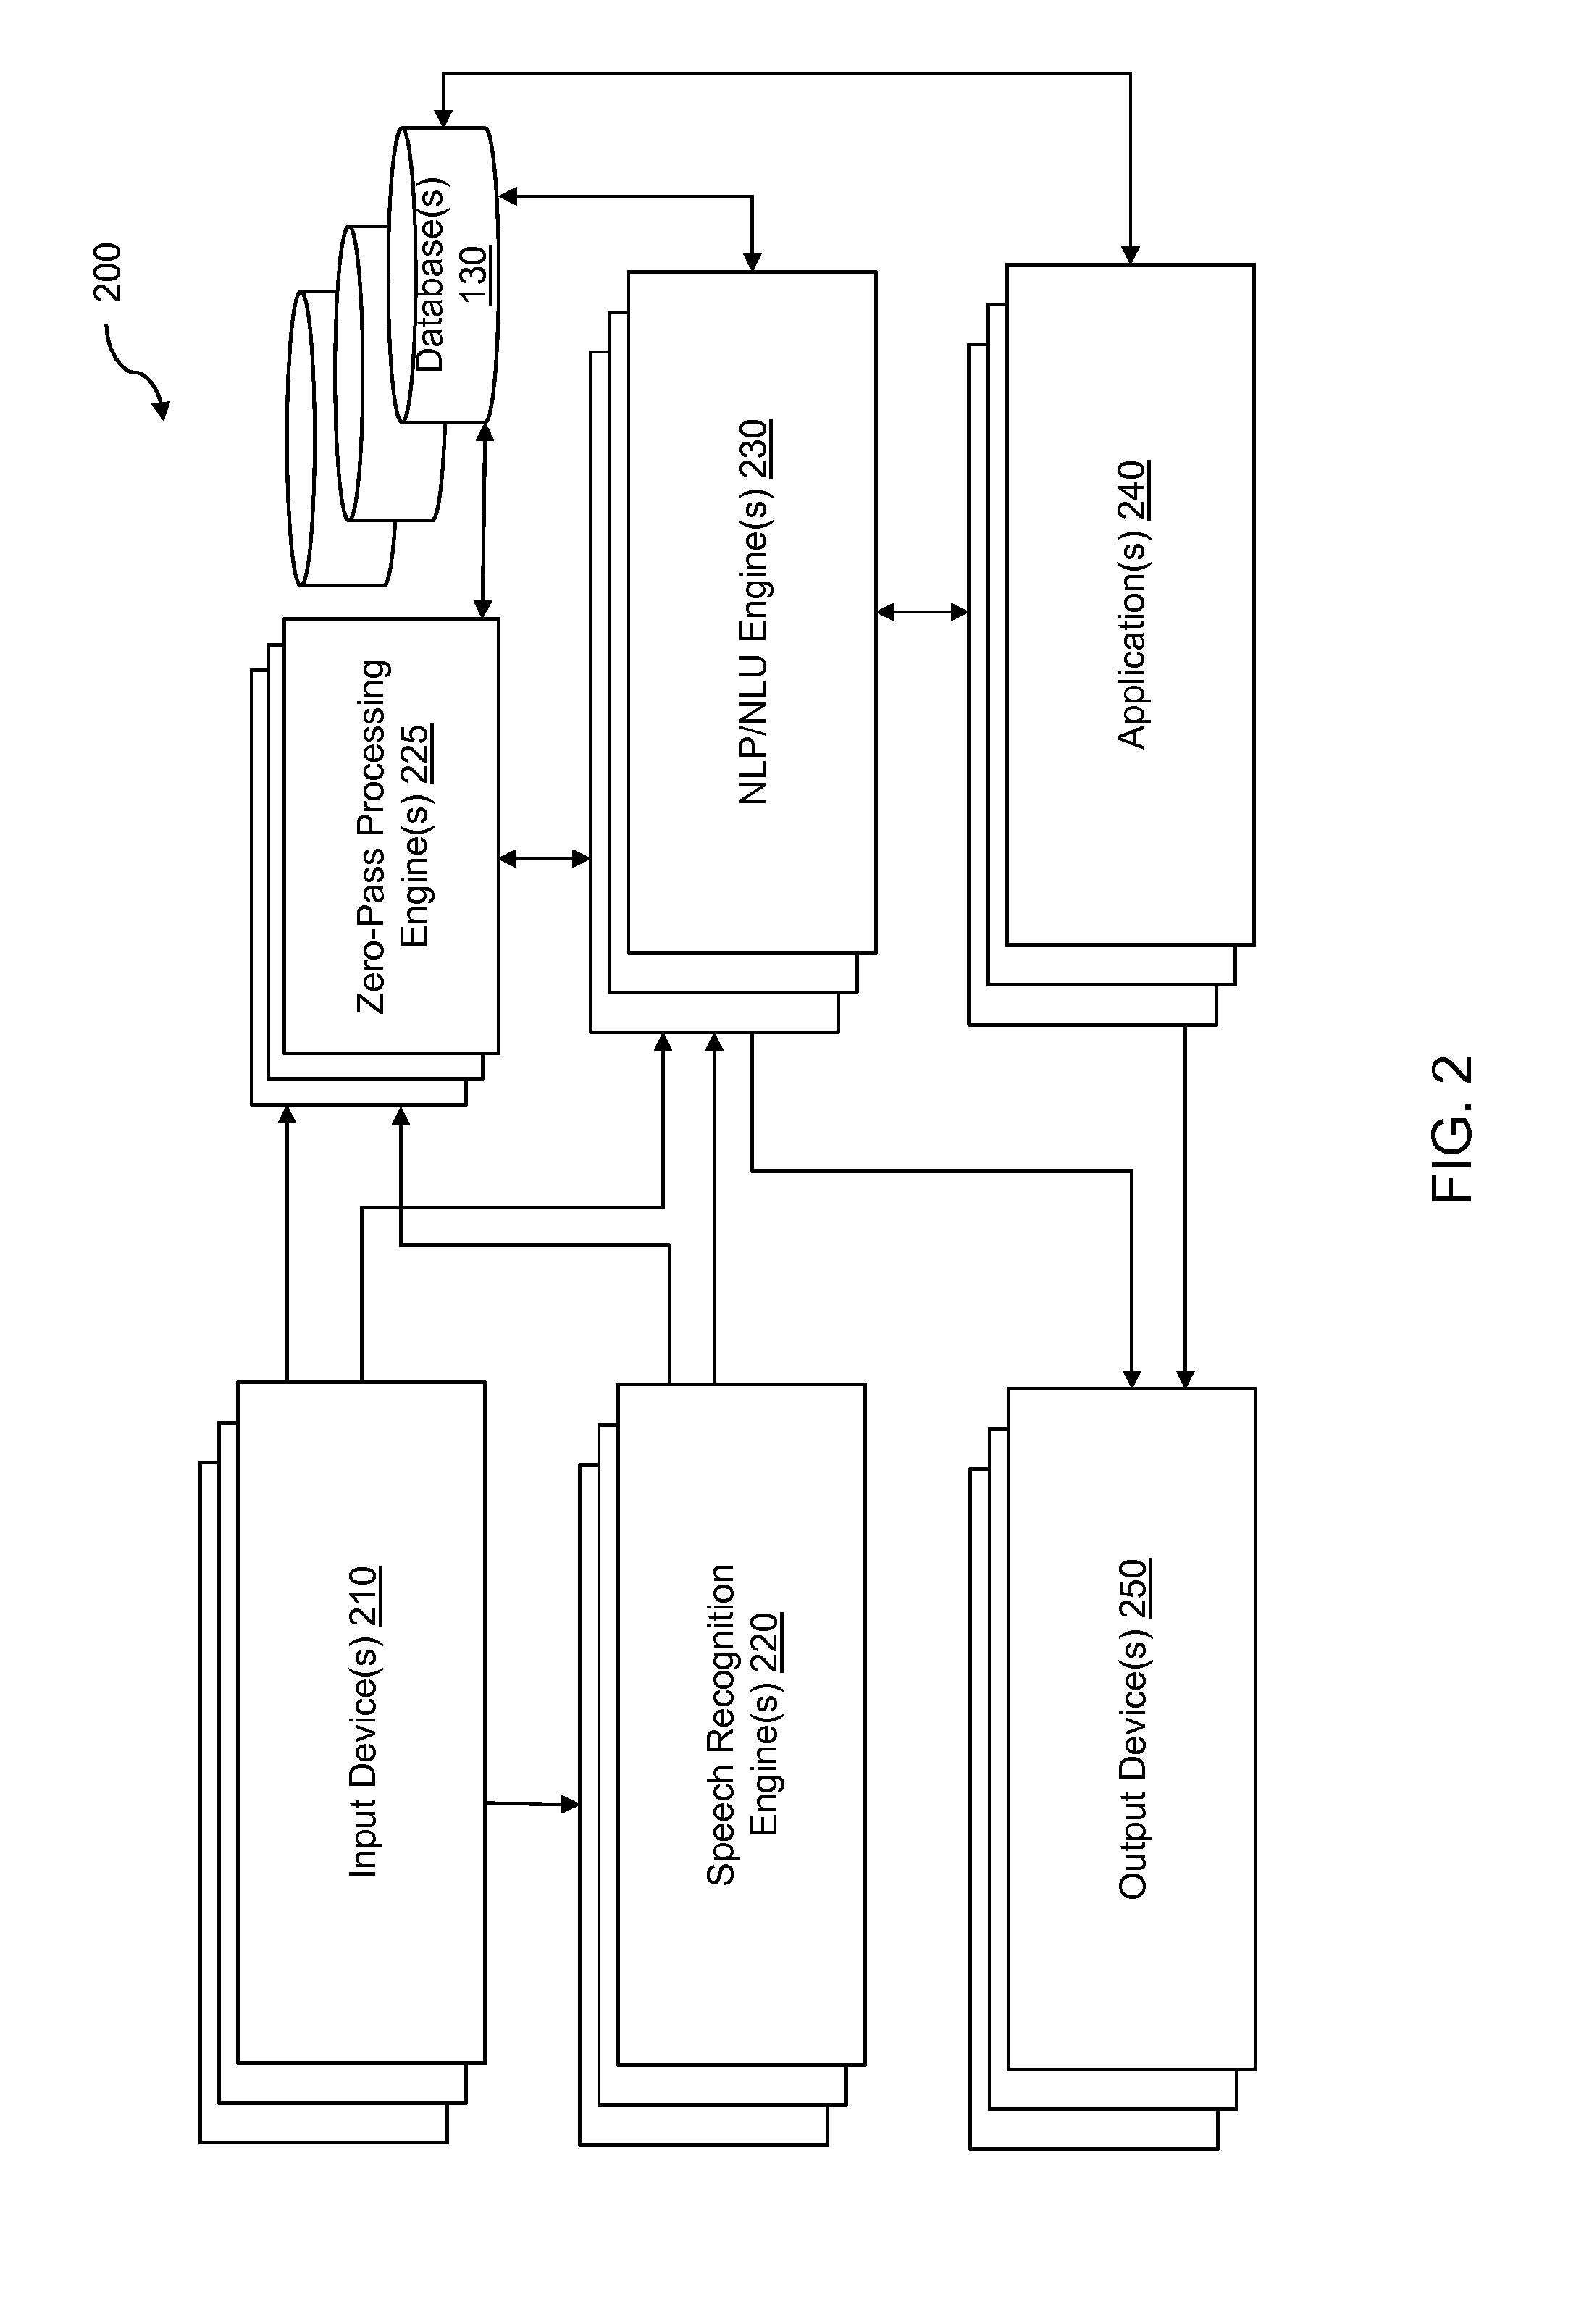 System and Method of Determining a Domain and/or an Action Related to a Natural Language Input